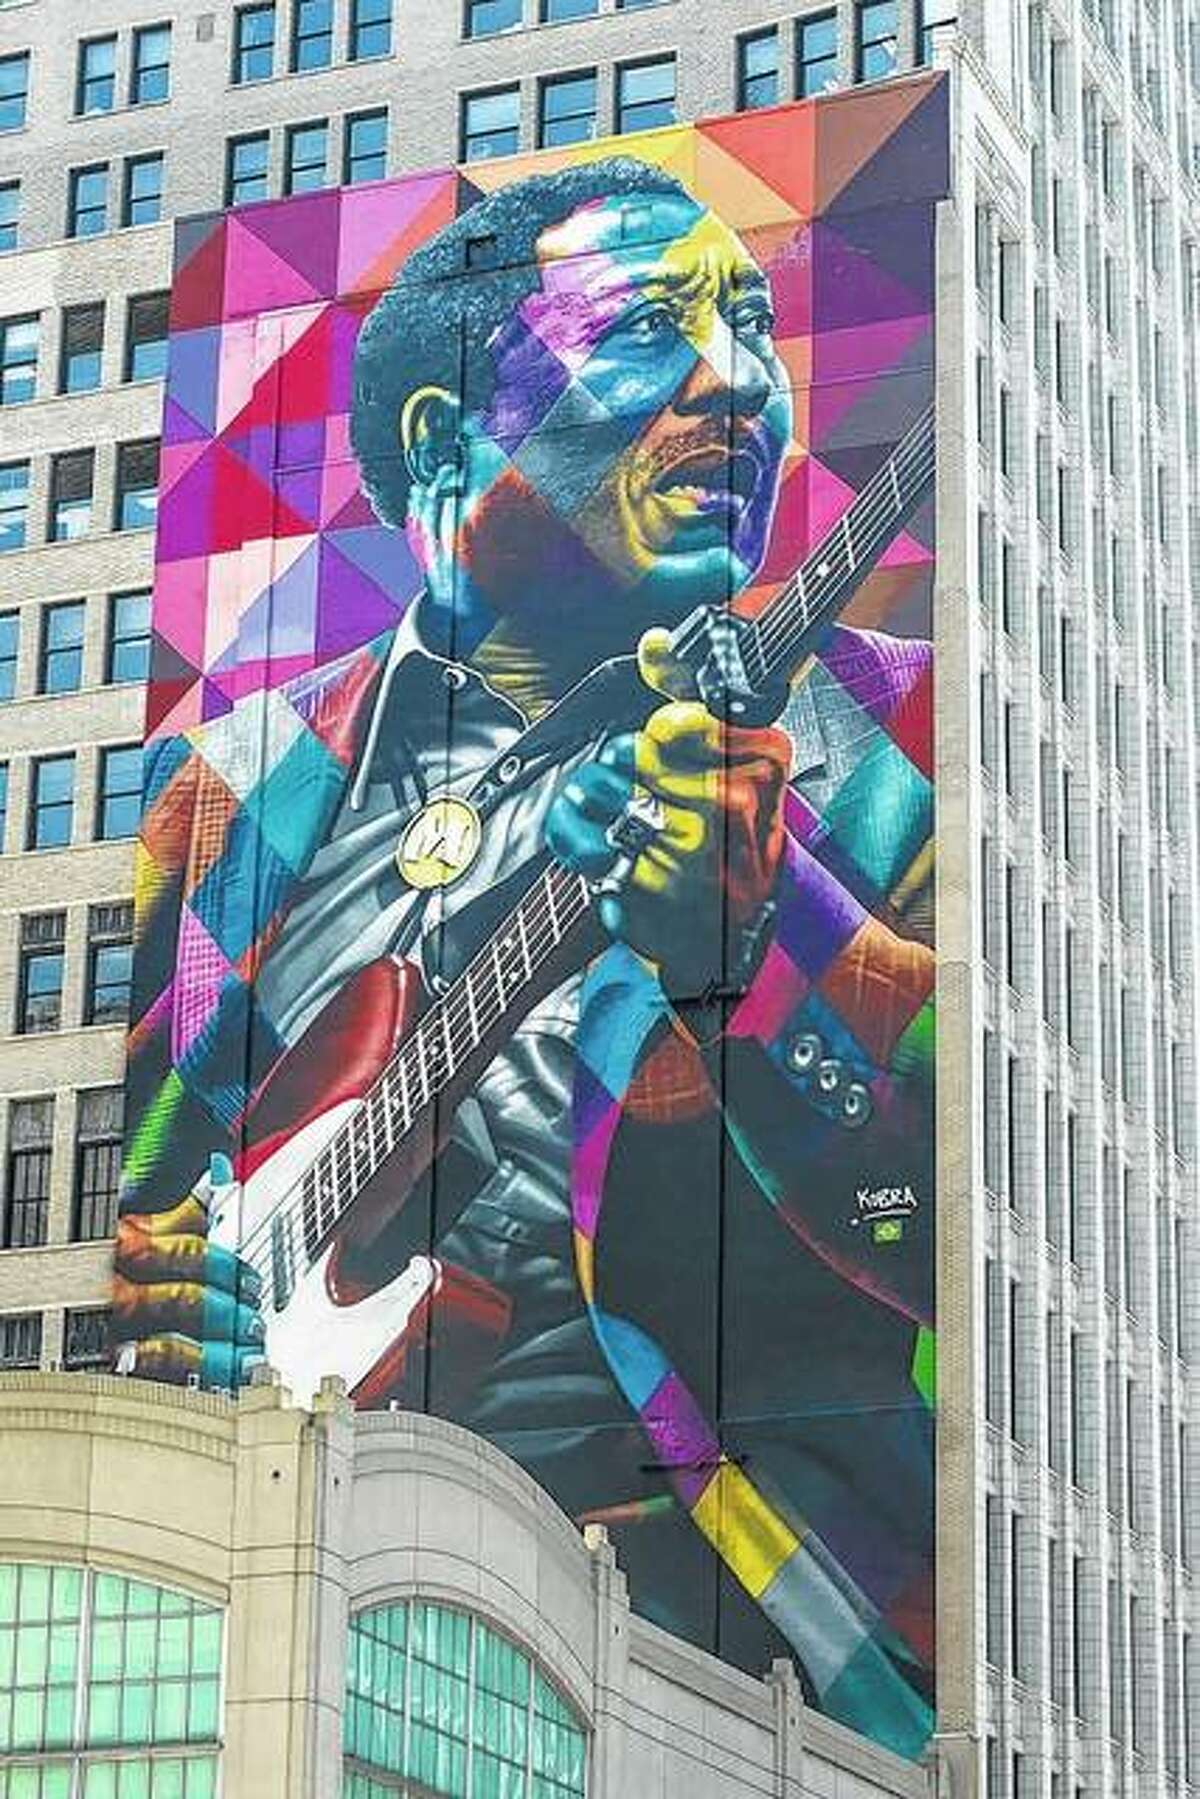 A nine-story mural of blues music legend Muddy Waters by artist Eduardo Kobra was completed in 2017 on State Street in Chicago.